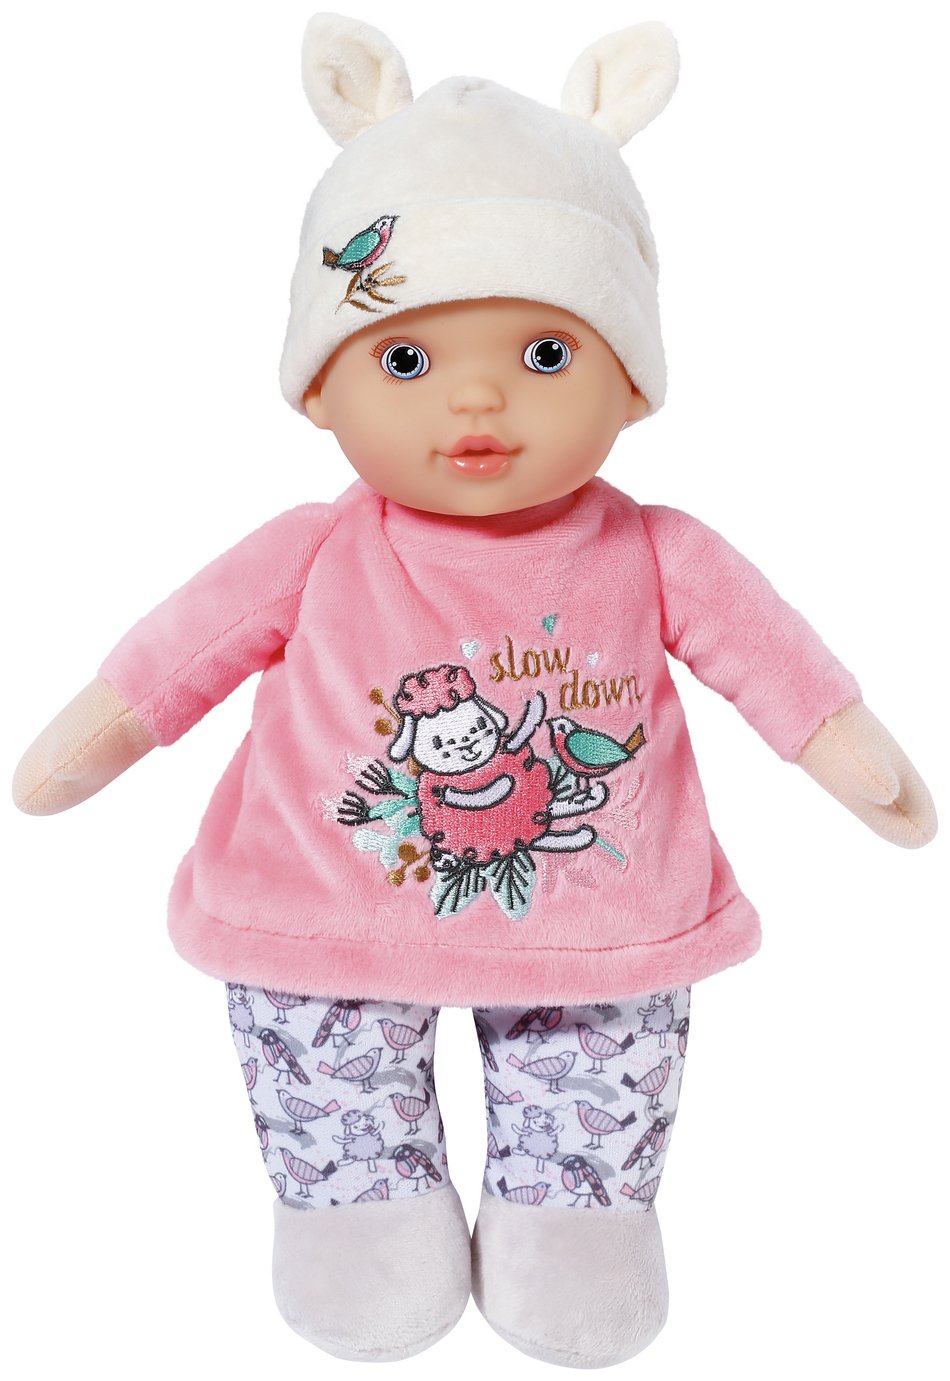 first baby doll for newborn